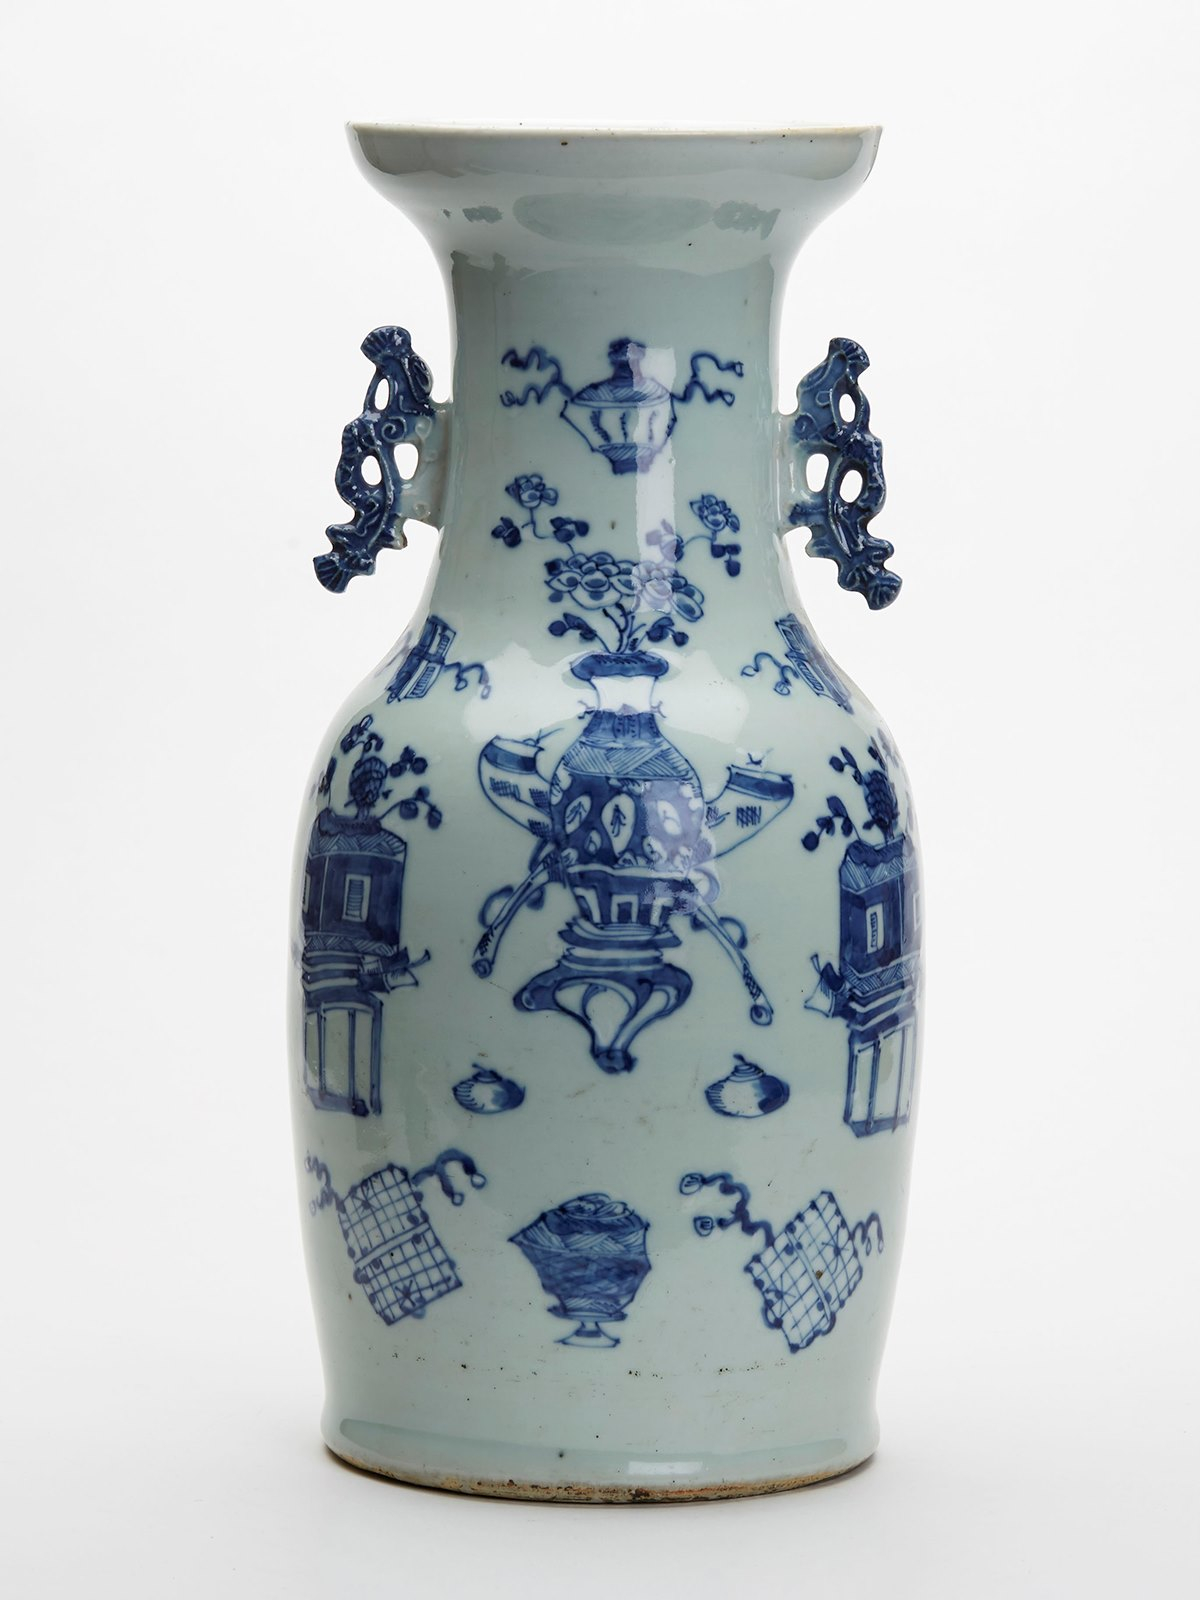 Details About Large Antique Chinese Celadon Blue White Vase 19th C with regard to sizing 1200 X 1600